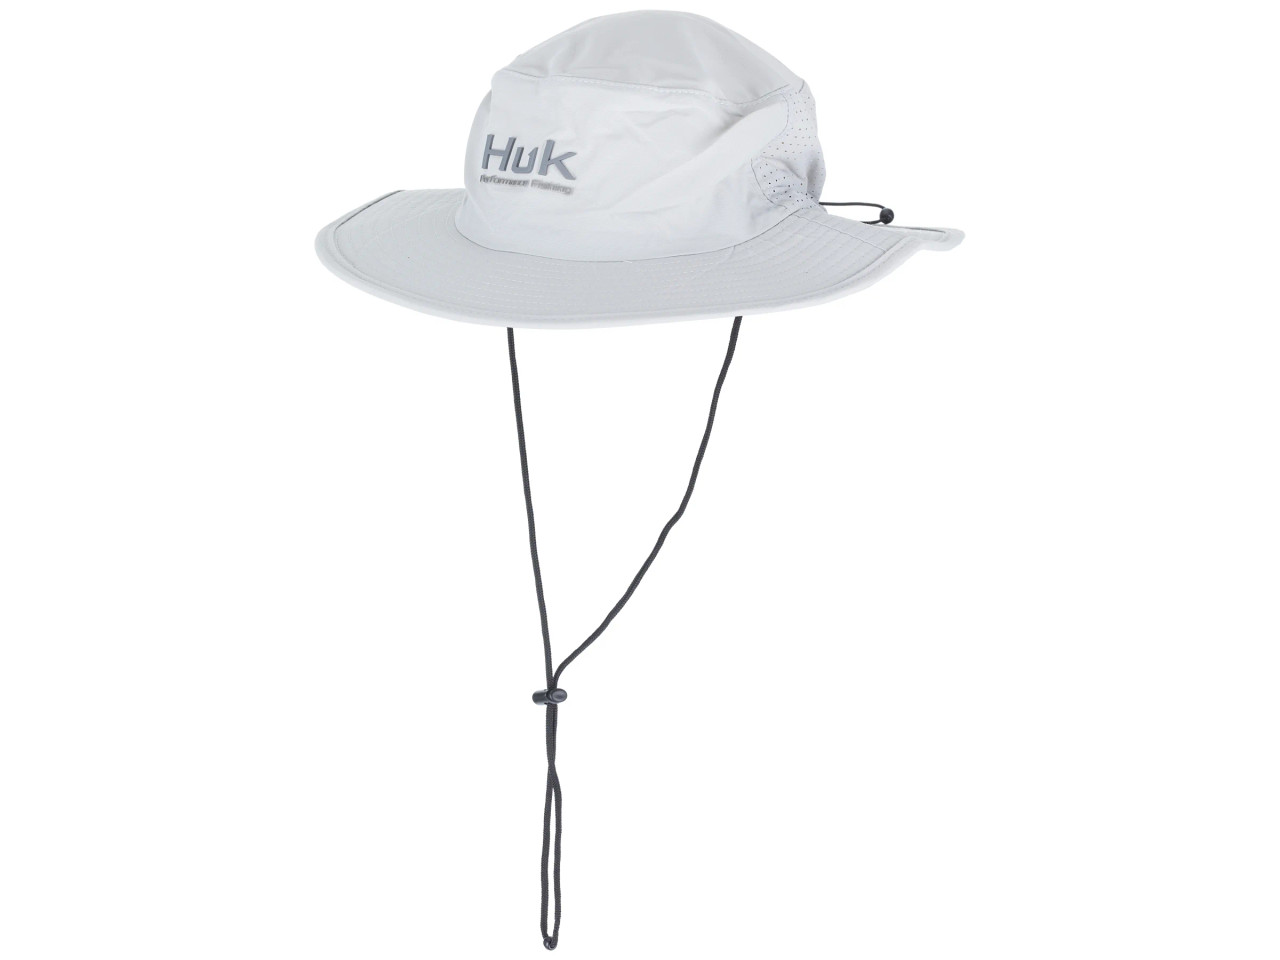 Huk Solid Harbor Mist Boonie Hat - Kinsey's Outdoors